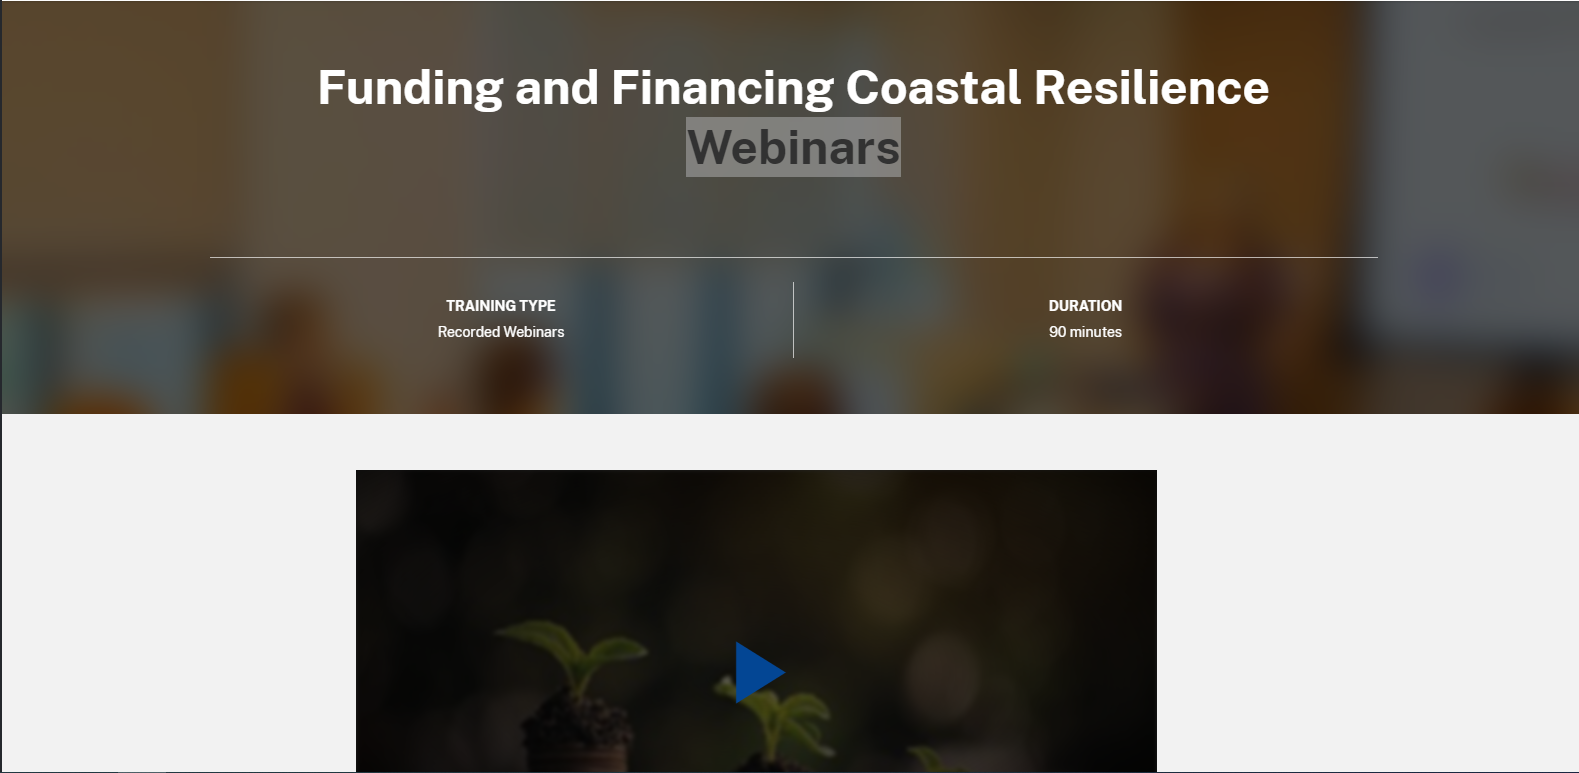 A preview of the Funding and Financing Coastal Resilience Webinars